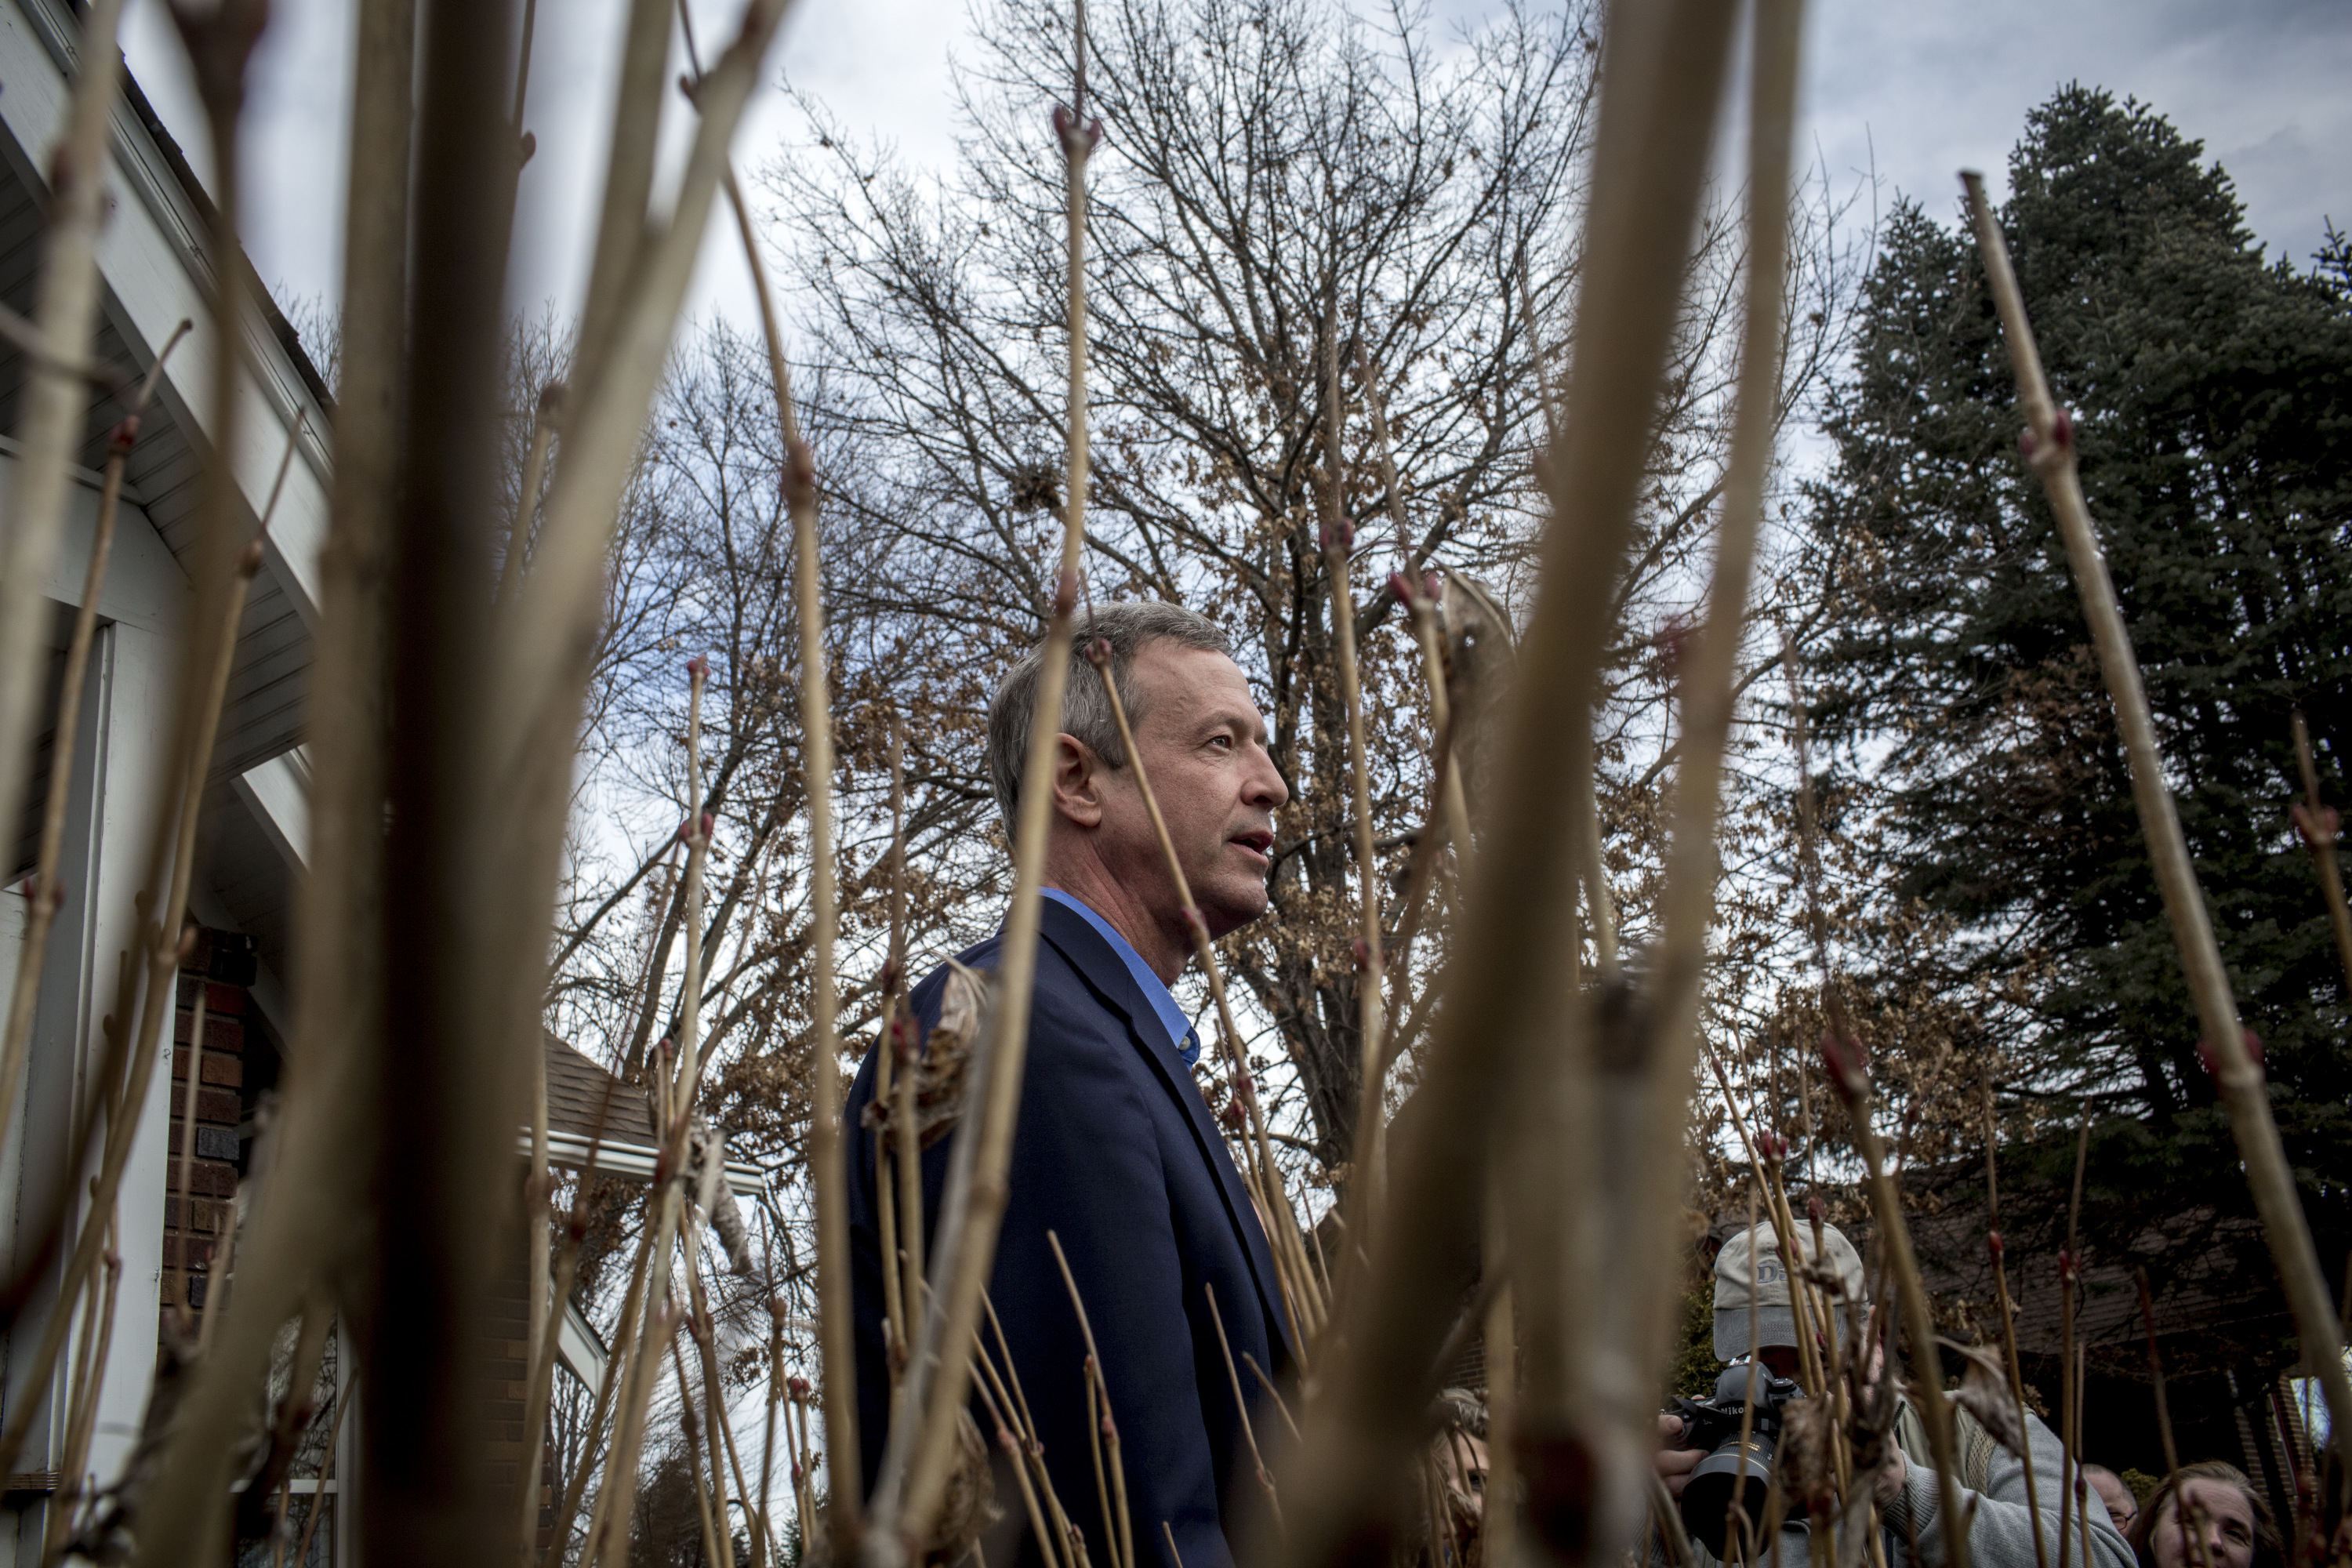 Martin O'Malley holds a campaign rally at a supporter's home in Johnston, Iowa on Jan. 31, 2016. (Natalie Keyssar for TIME)